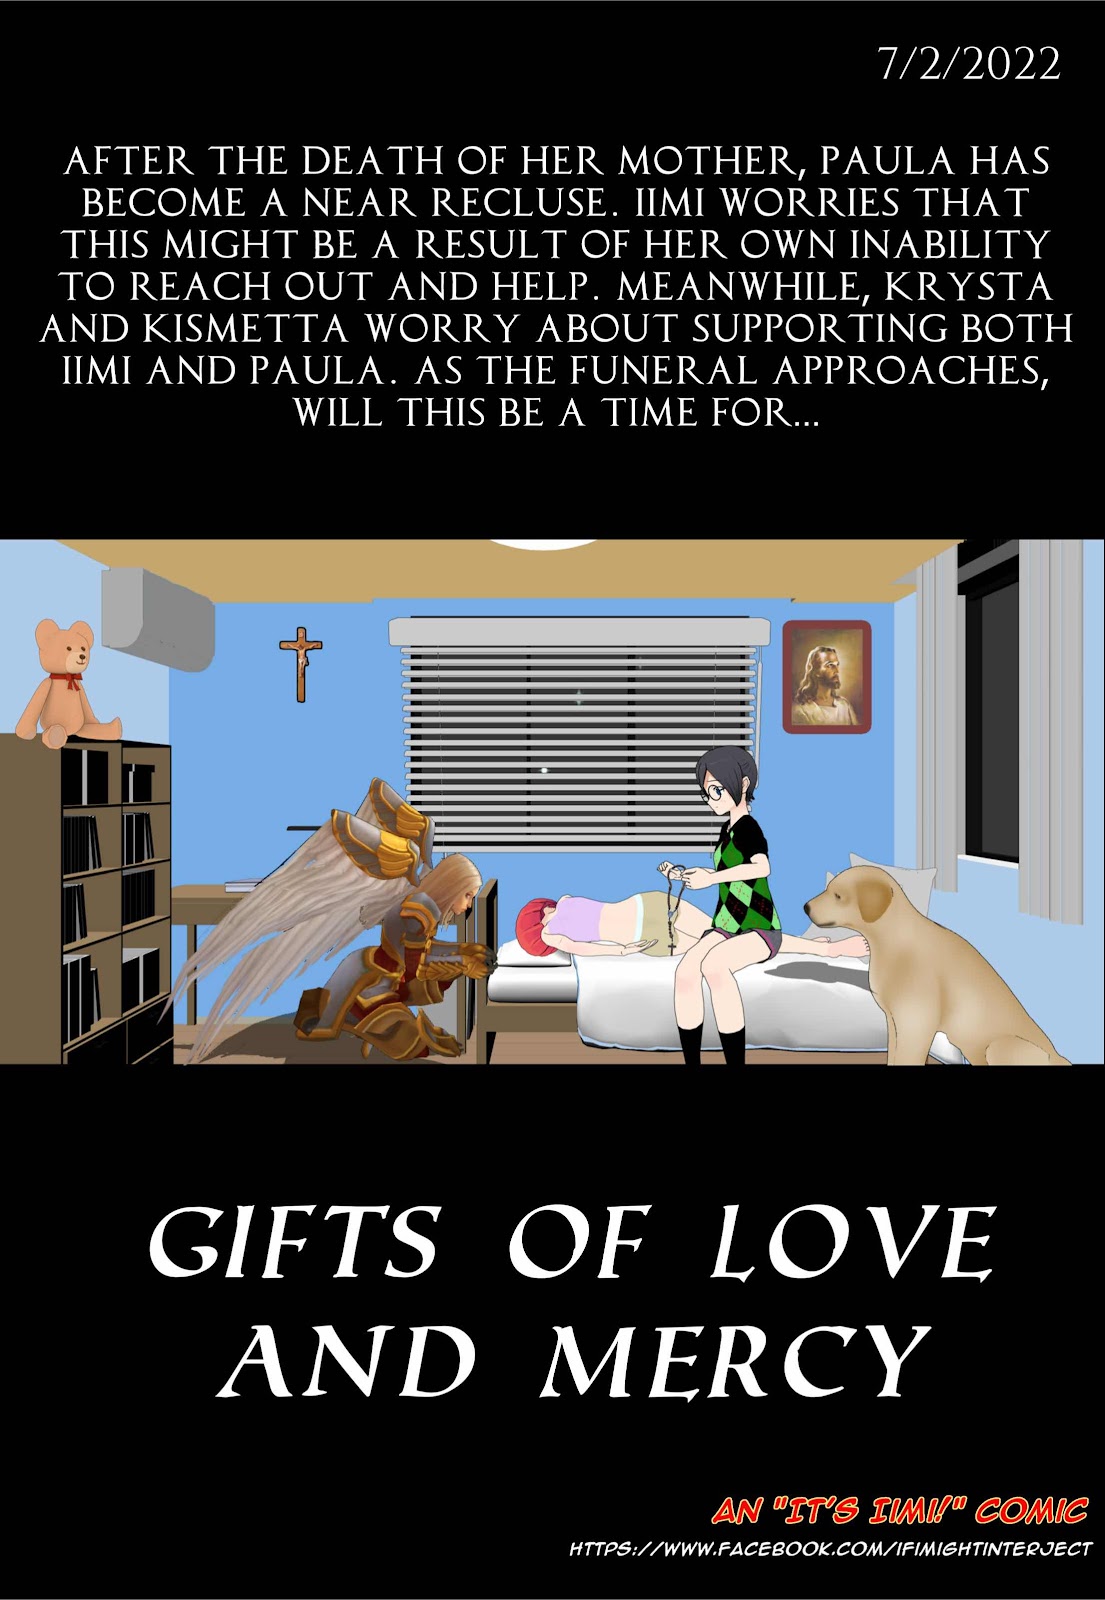 It’s Iimi! Gifts of Love and Mercy